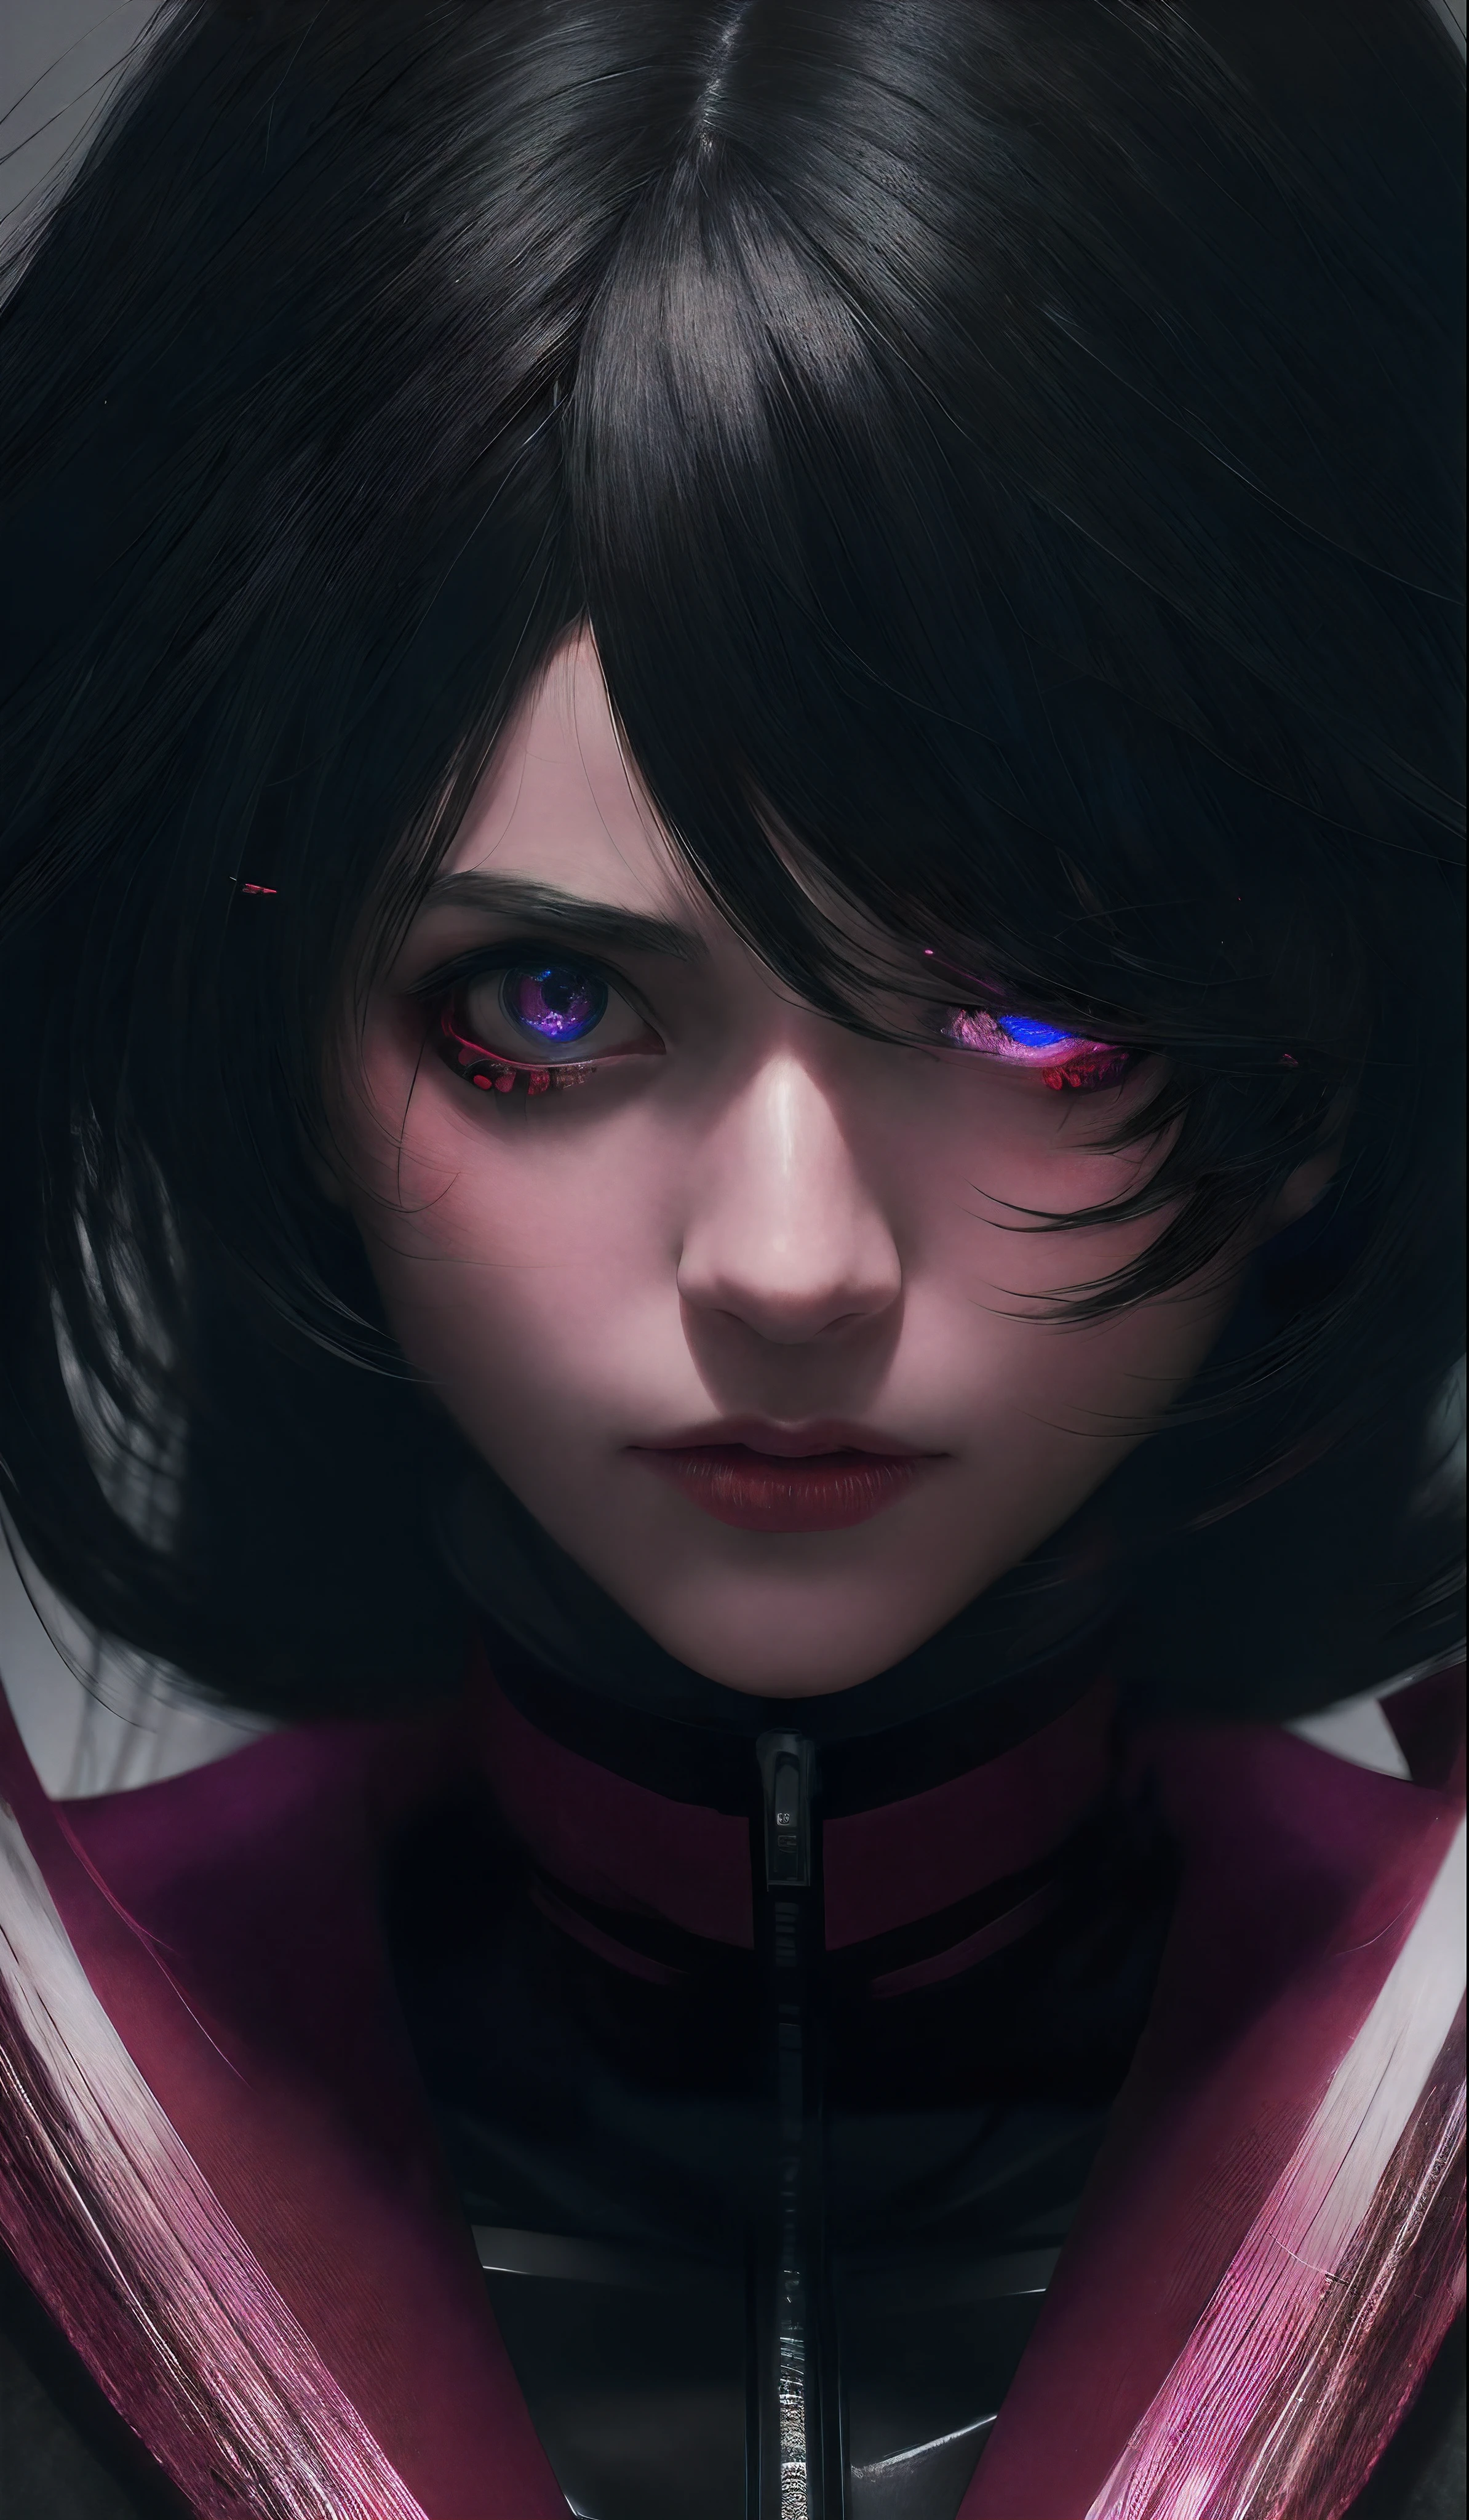 Anime character with blood dripping from eyes and black hair, 4K anime style, with glowing red eyes, anime wallpaper 4k, Gapmoe Yandere Grimdark, Portrait Gapmoe Yandere Grimdark, anime wallpapers 4k, anime wallpaper 4K, Anime Art Wallpaper 8K, Badass Anime 8K, Anime Art Wallpaper 4K, Anime Art Wallpaper 4K,